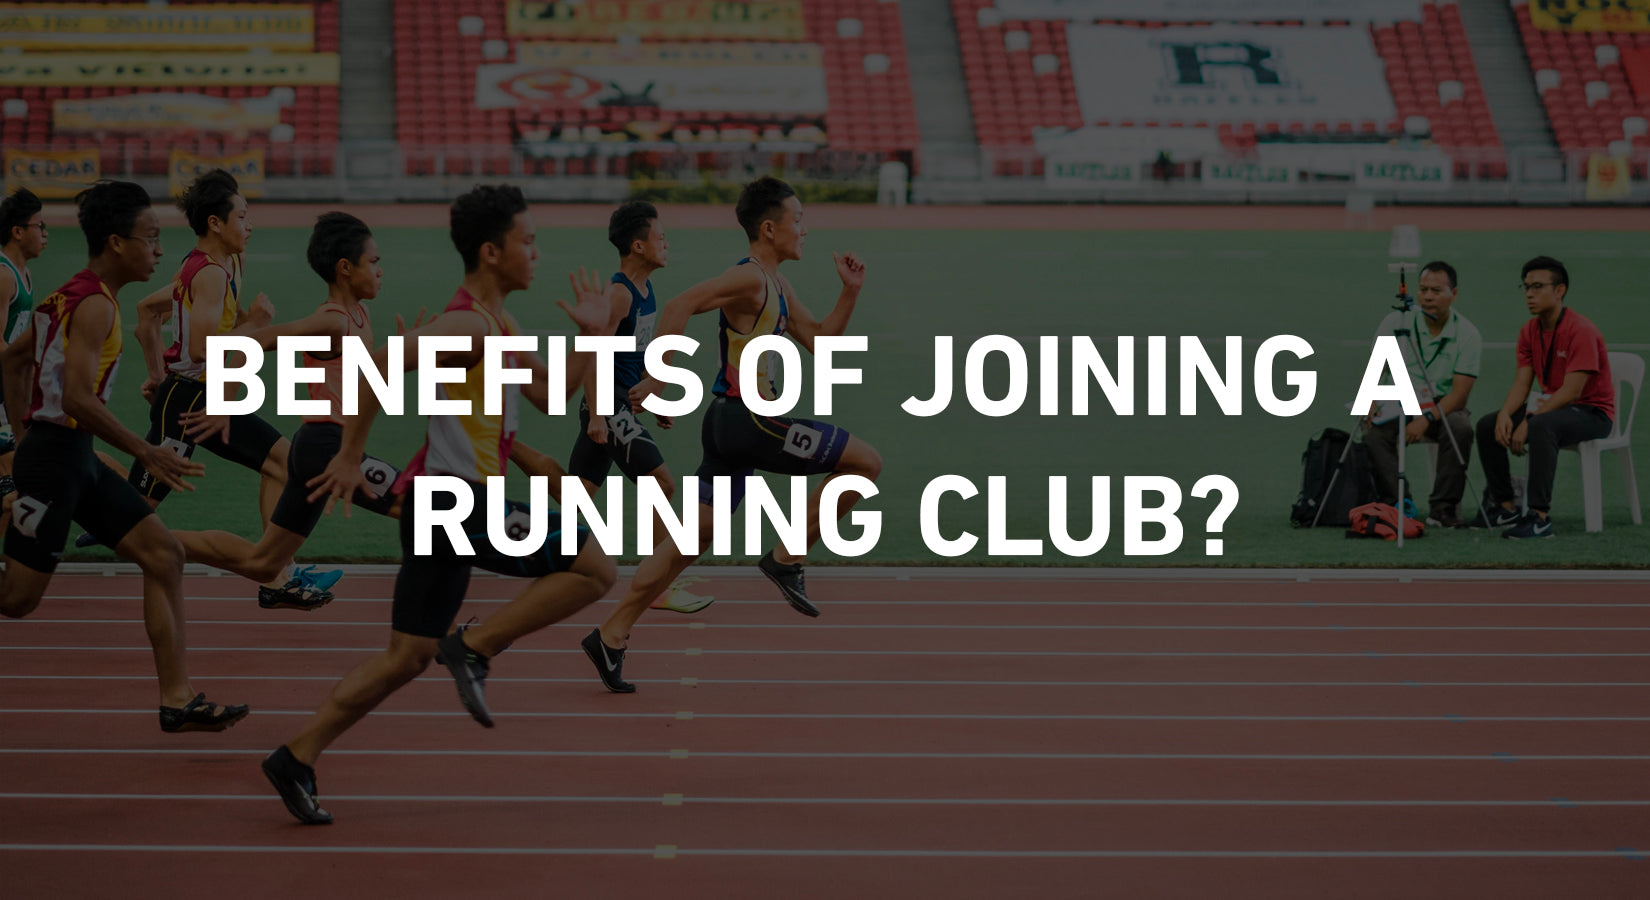 The Benefits of Joining a Running Club